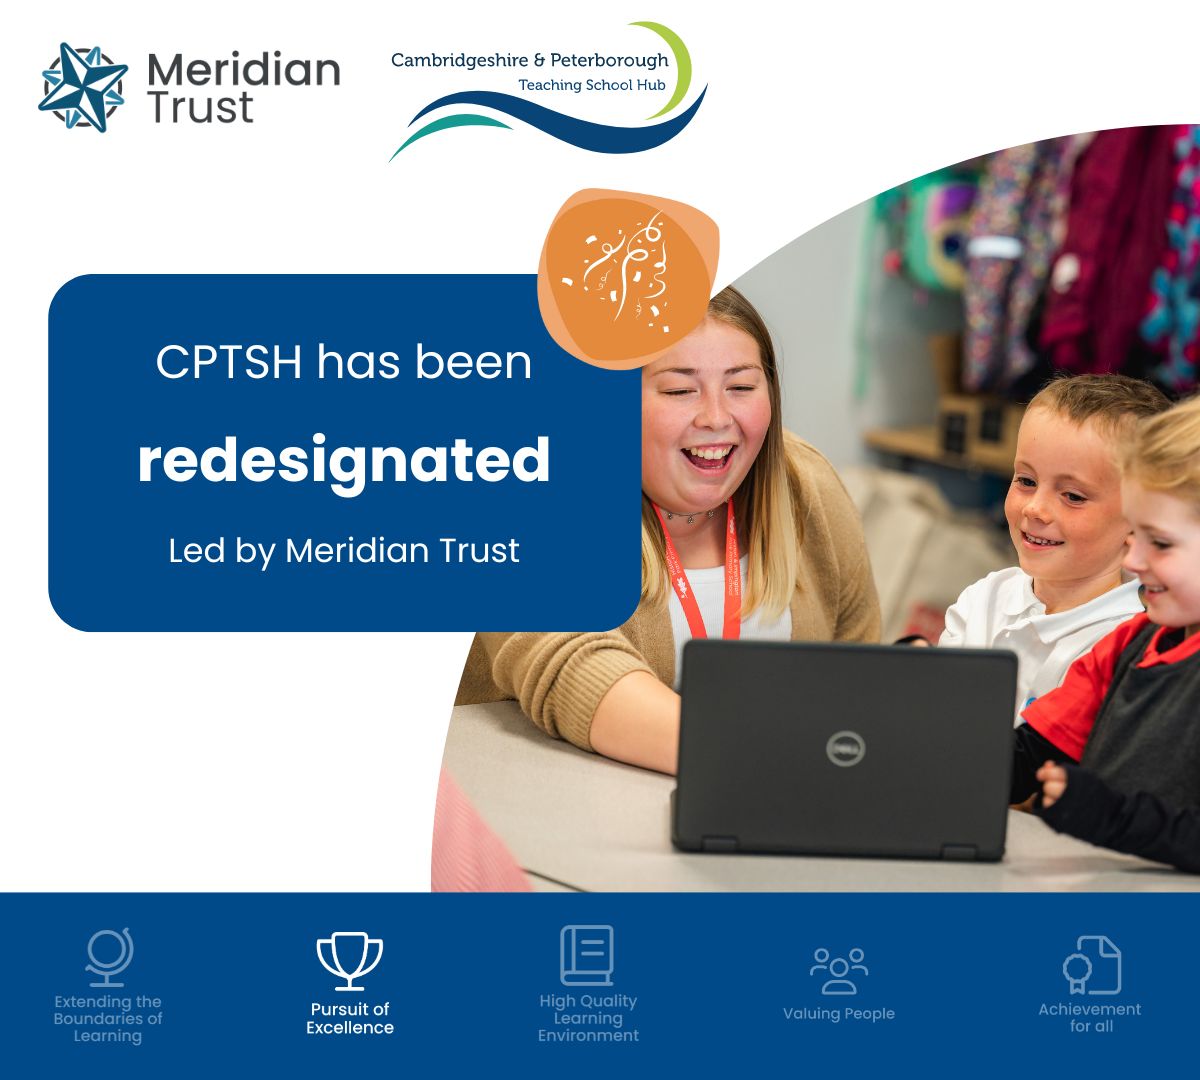 In more fantastic news concerning teacher training, we are delighted to share the news that @CPTSHub has been redesignated for four further years (2024 to 2028). 📷 Read more on our website: meridiantrust.co.uk/cambridge-and-… #CPTSH #TeacherTraining #MeridianTrust